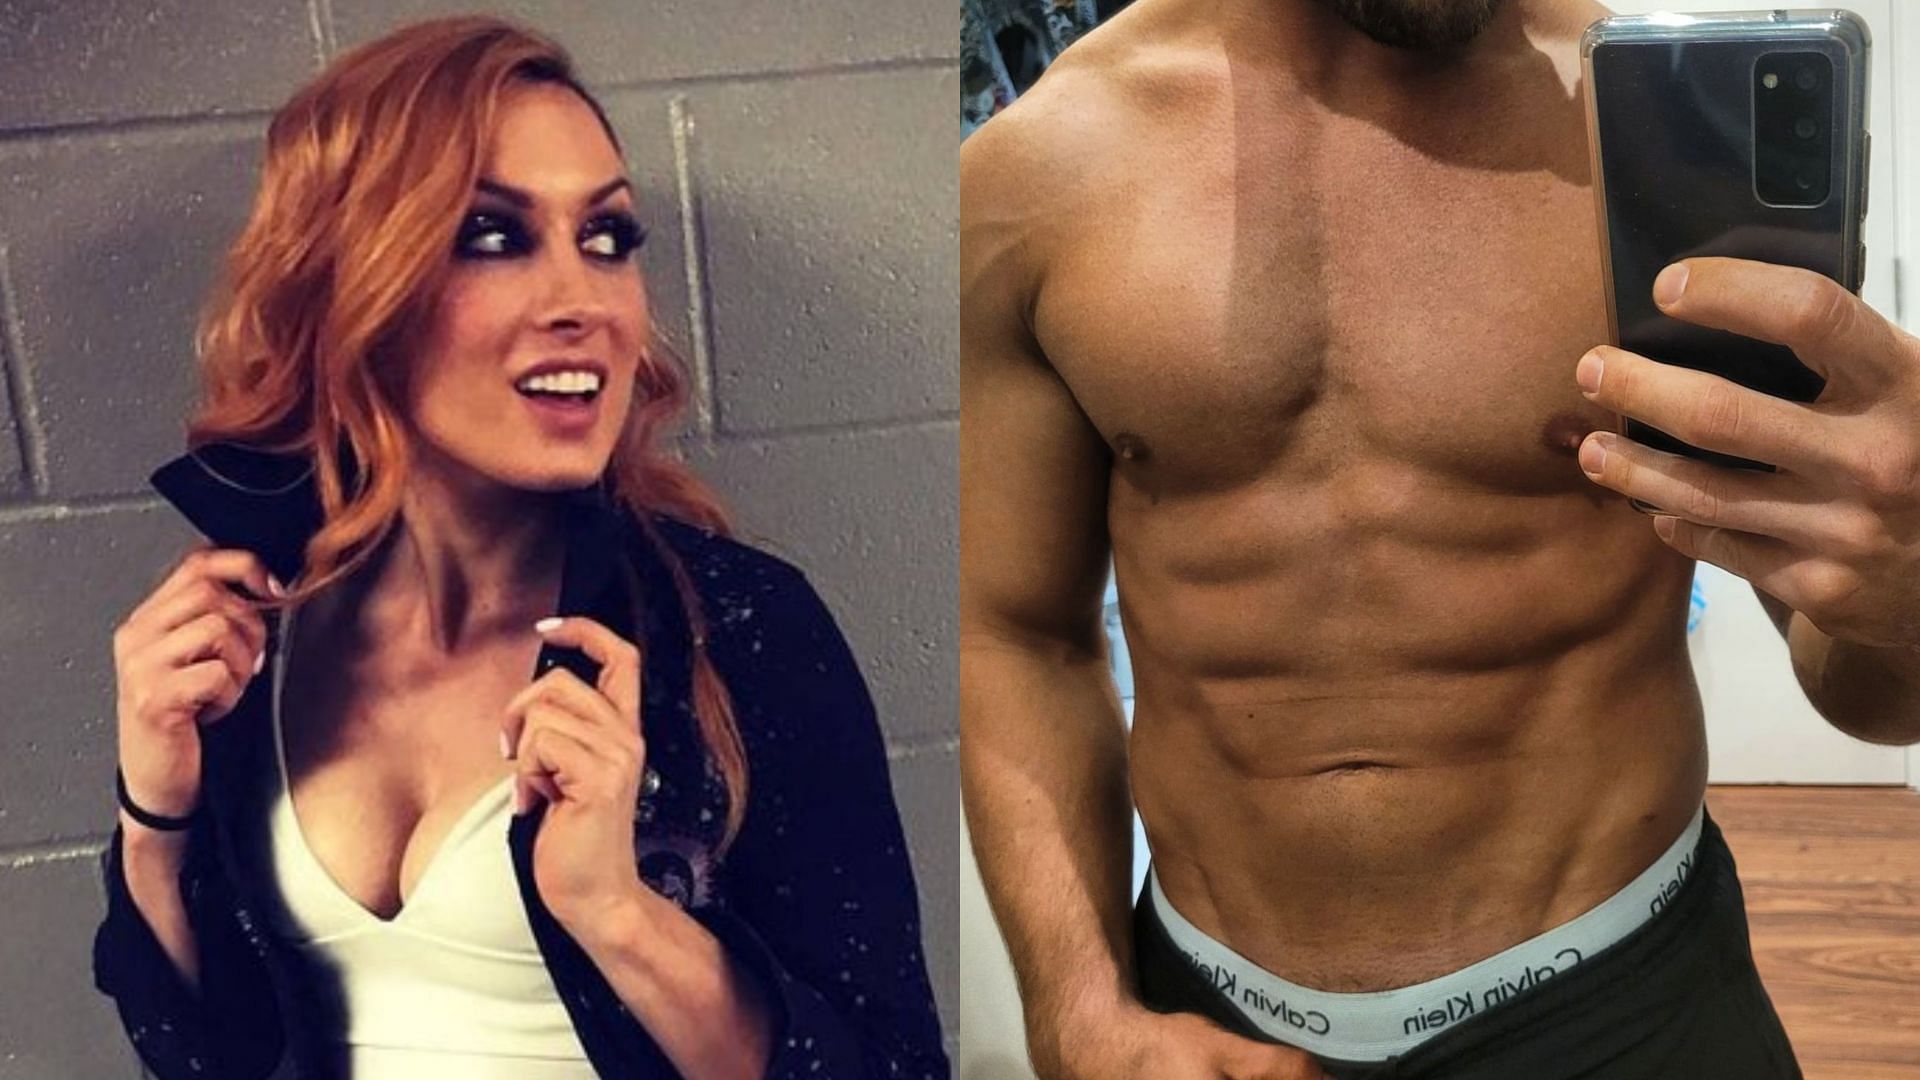 WWE Superstars Becky Lynch (left) and JD McDonagh (right)